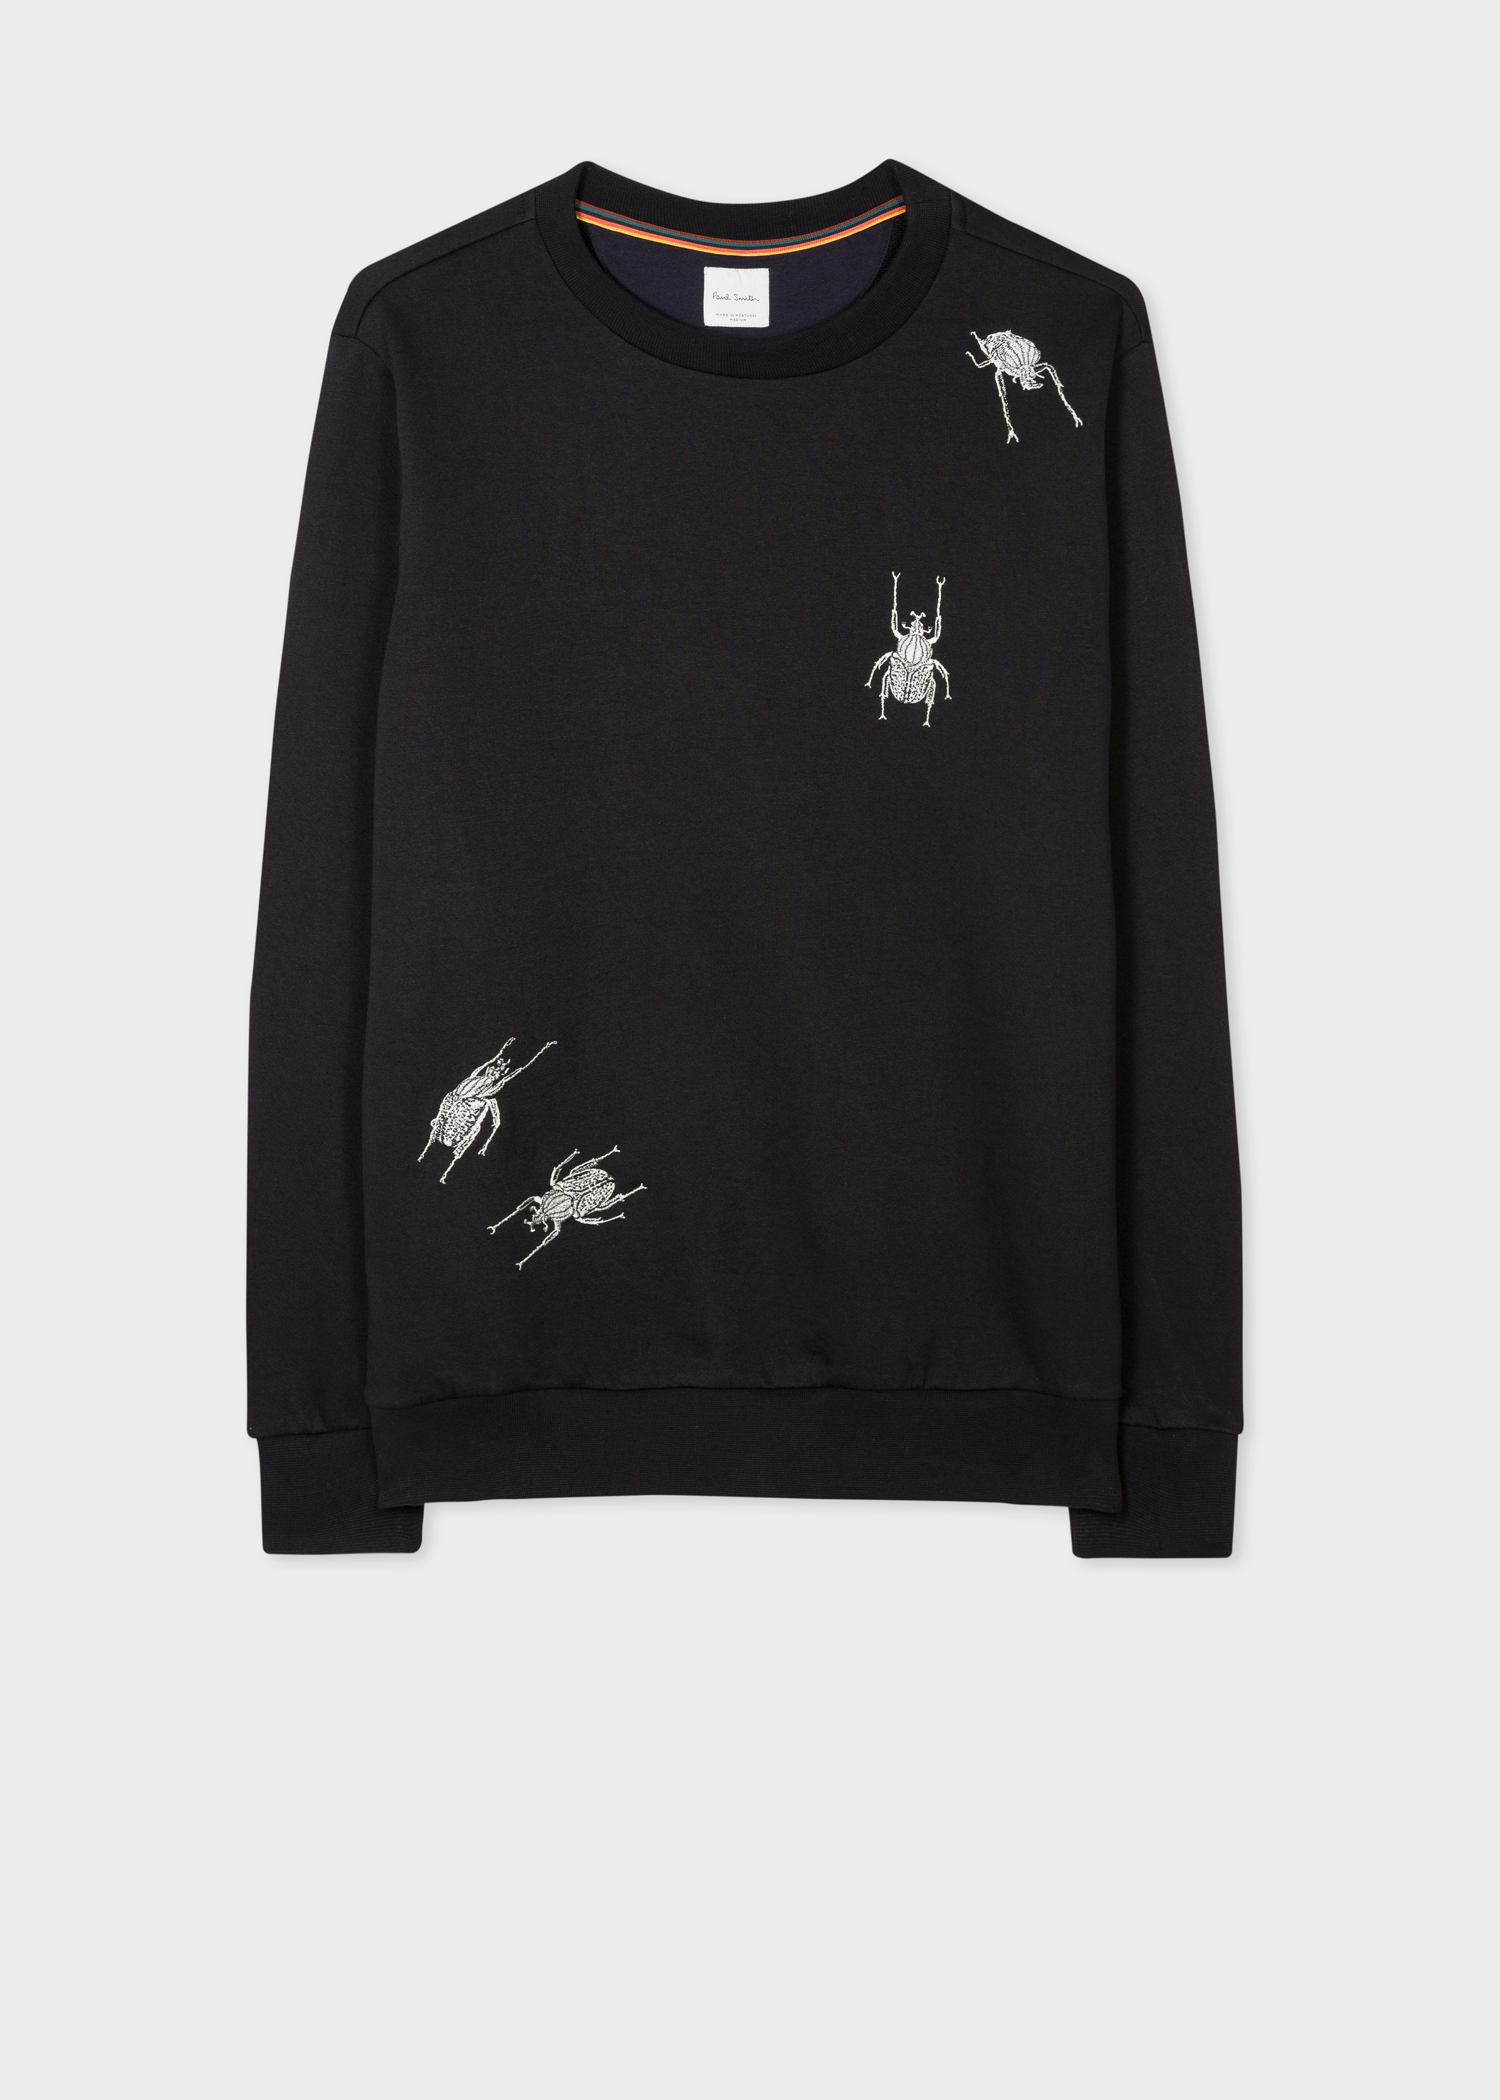 Front view - Men's Black Embroidered 'Beetle' Sweatshirt Paul Smith